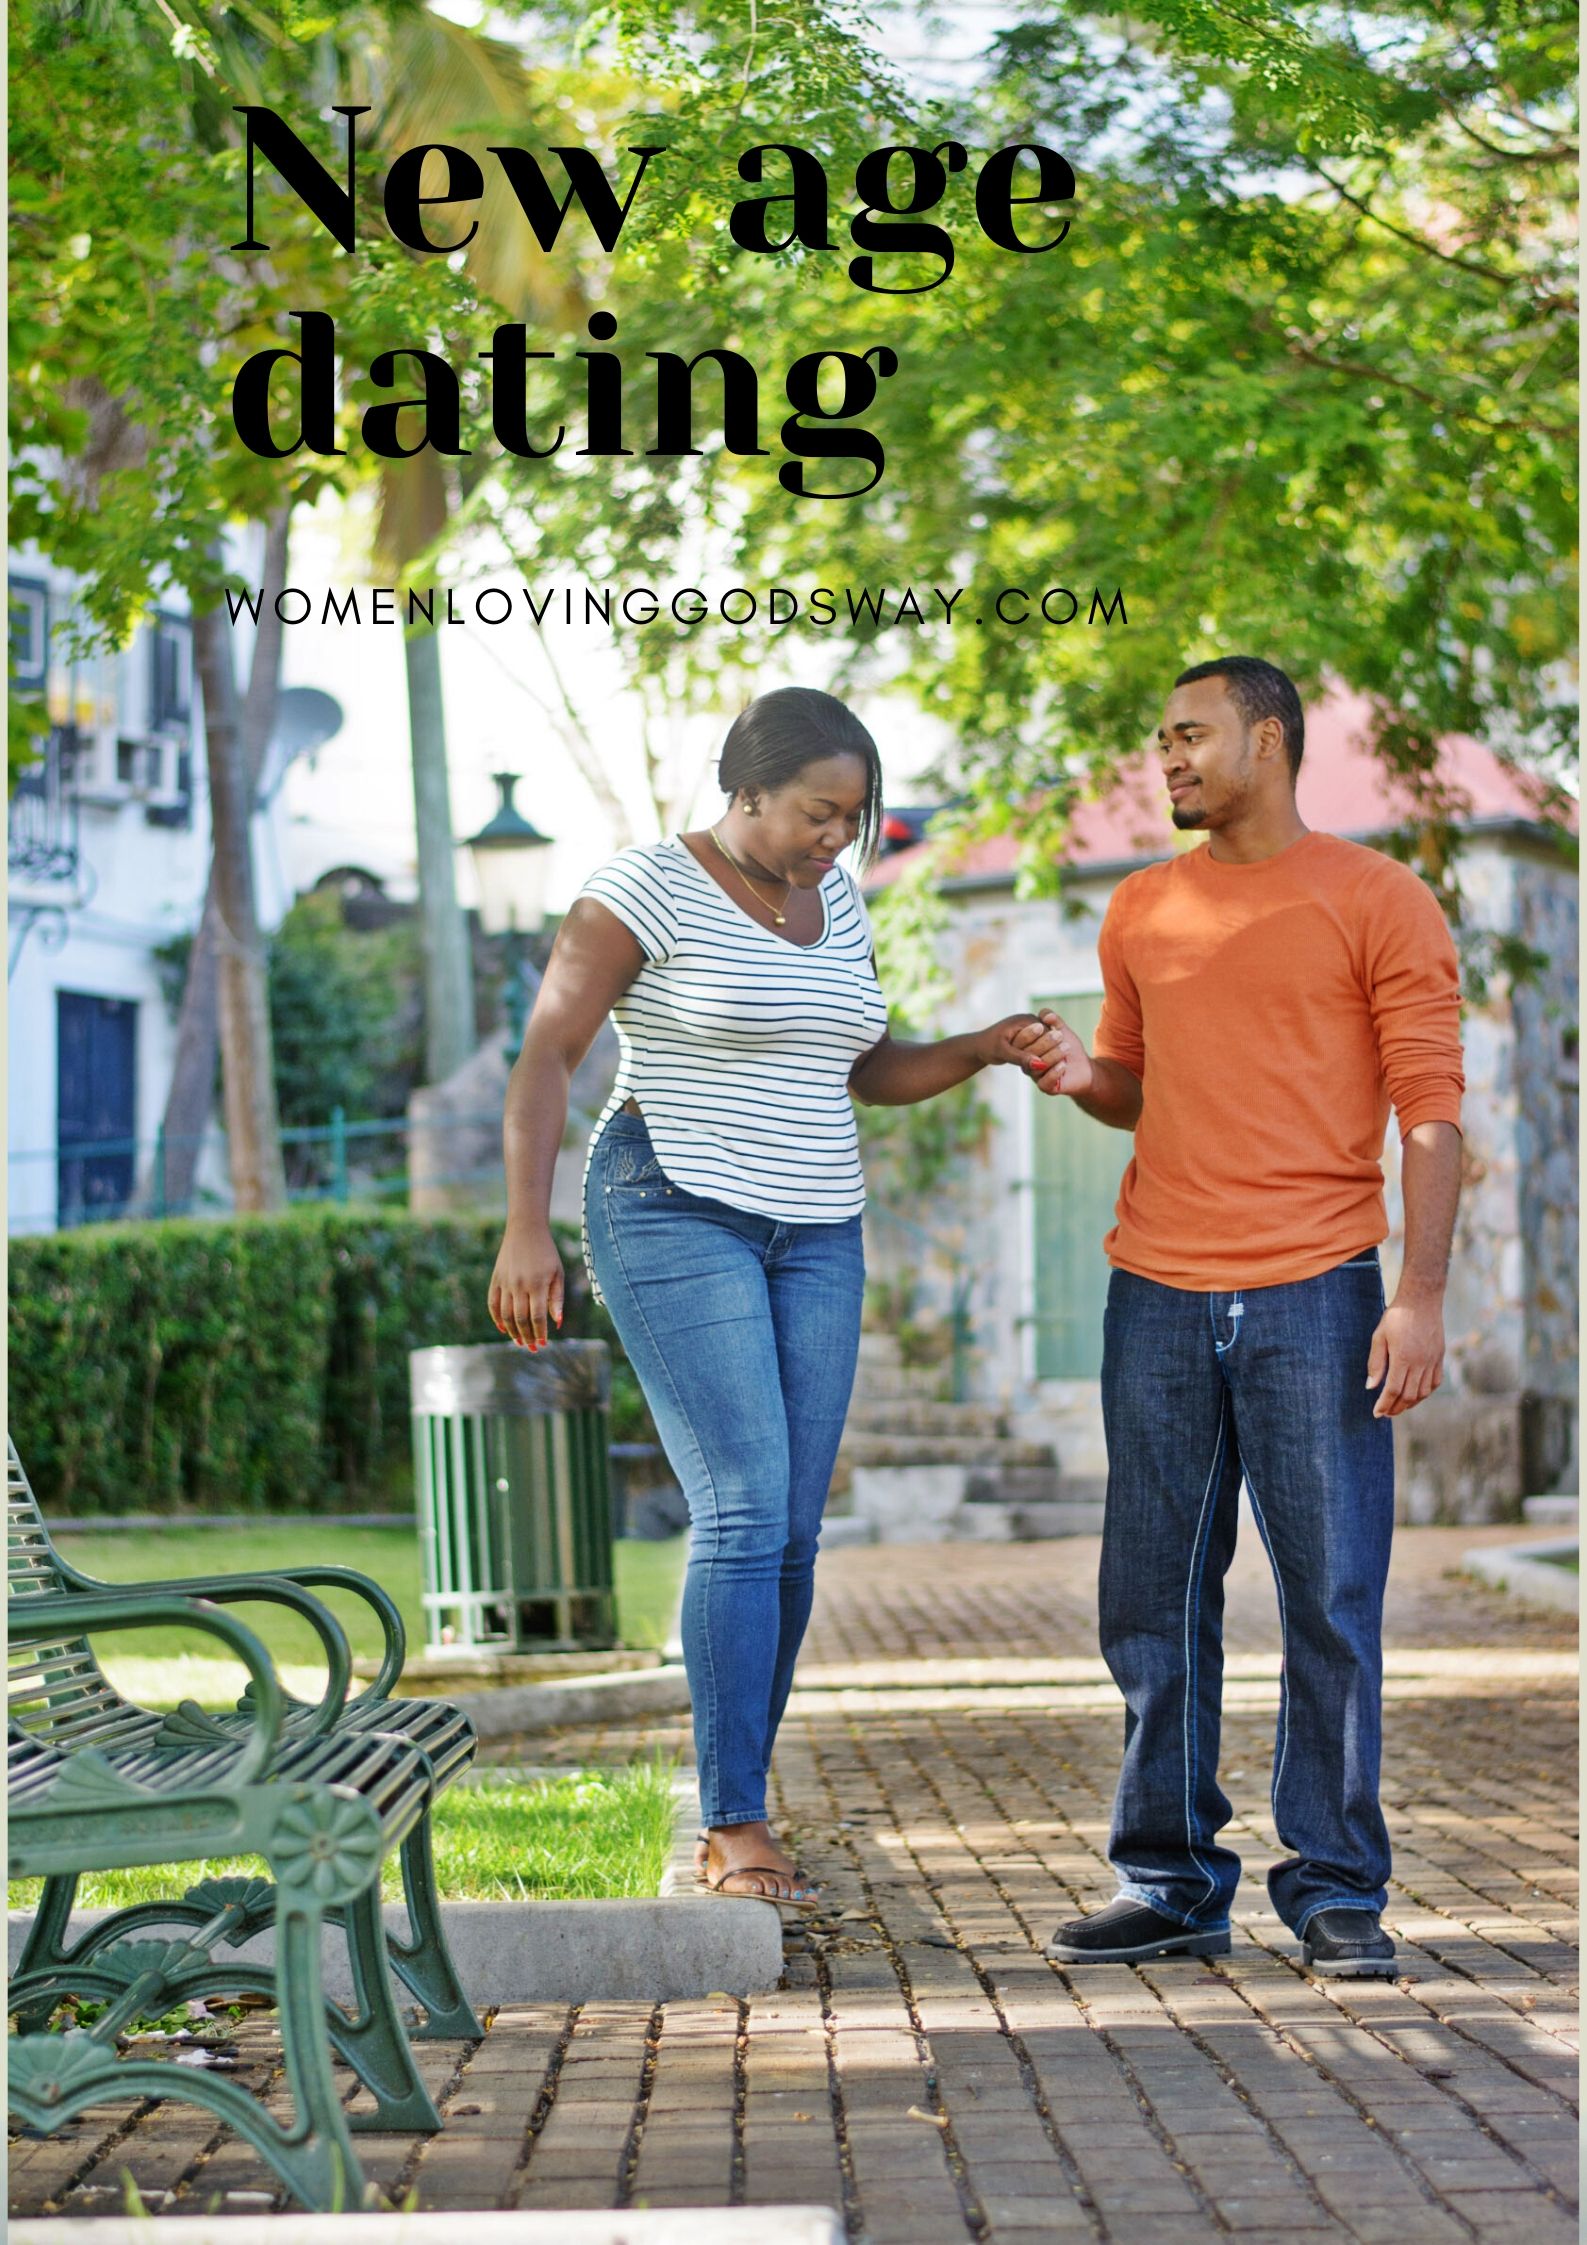 New age dating